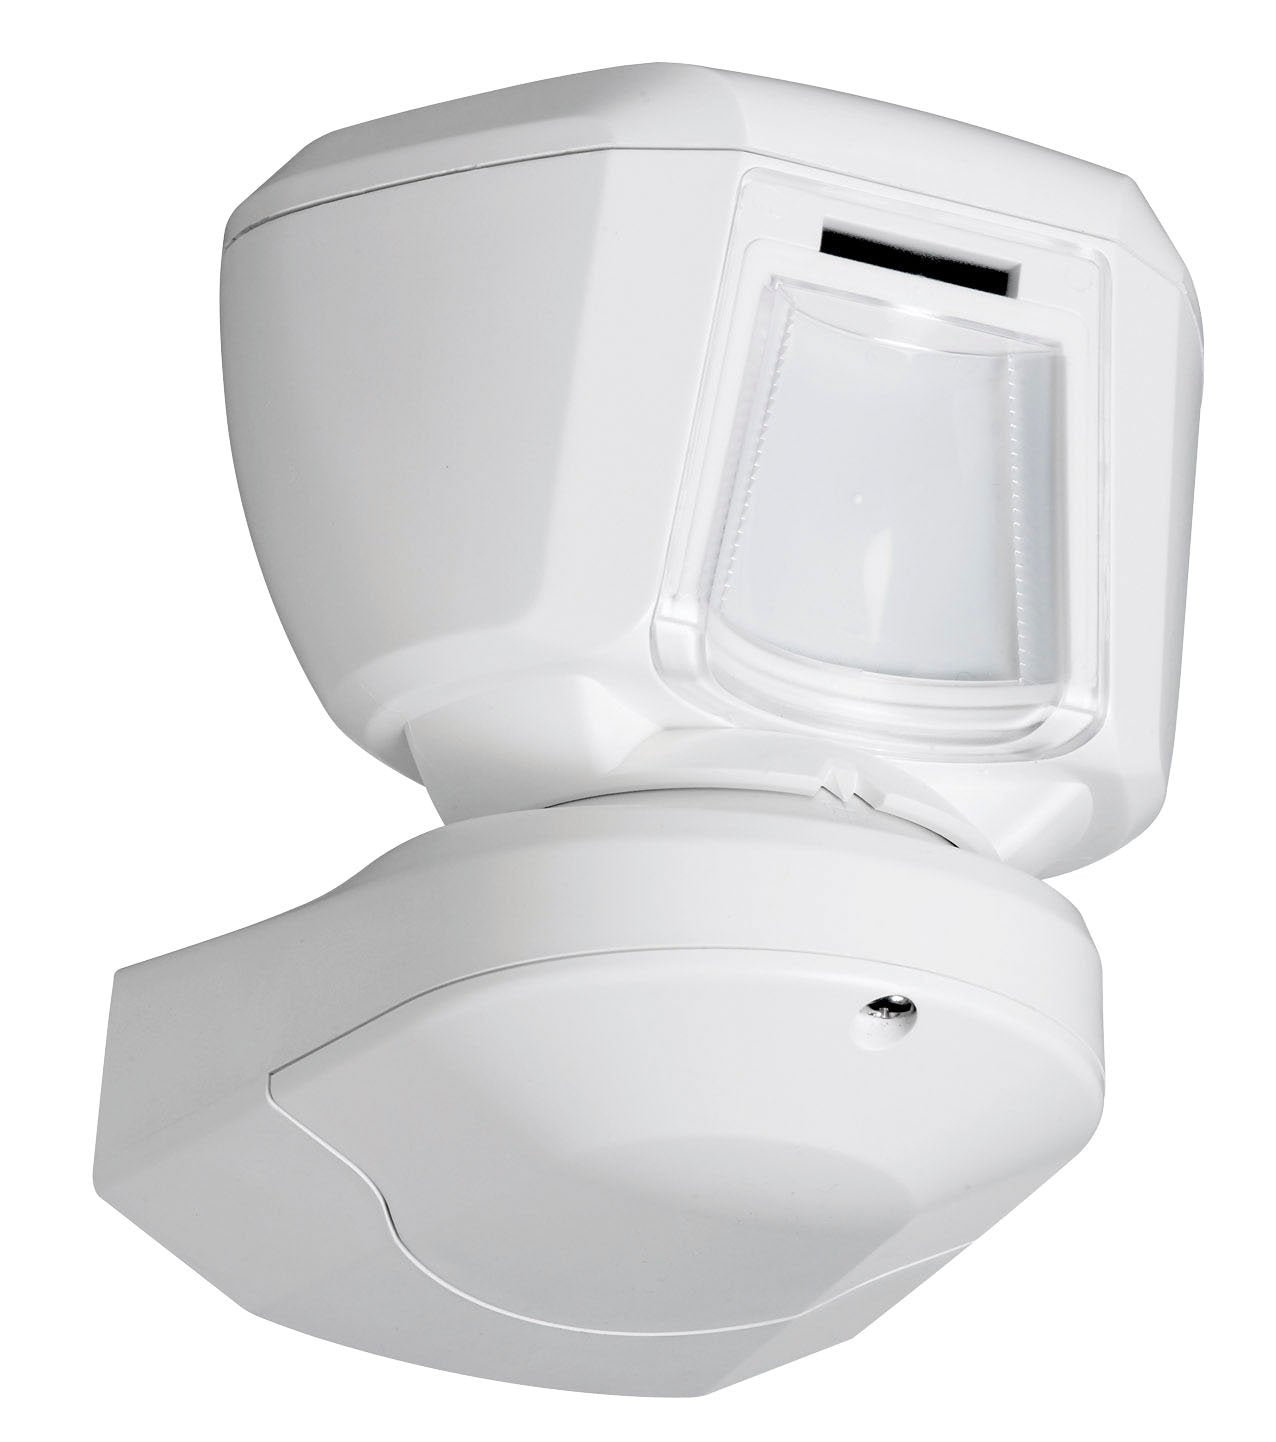 DSC* Power-G Wireless Outdoor PIR Motion Detector with PET Immunity (up to 18KGS), Range 12M/90@2.4M Height